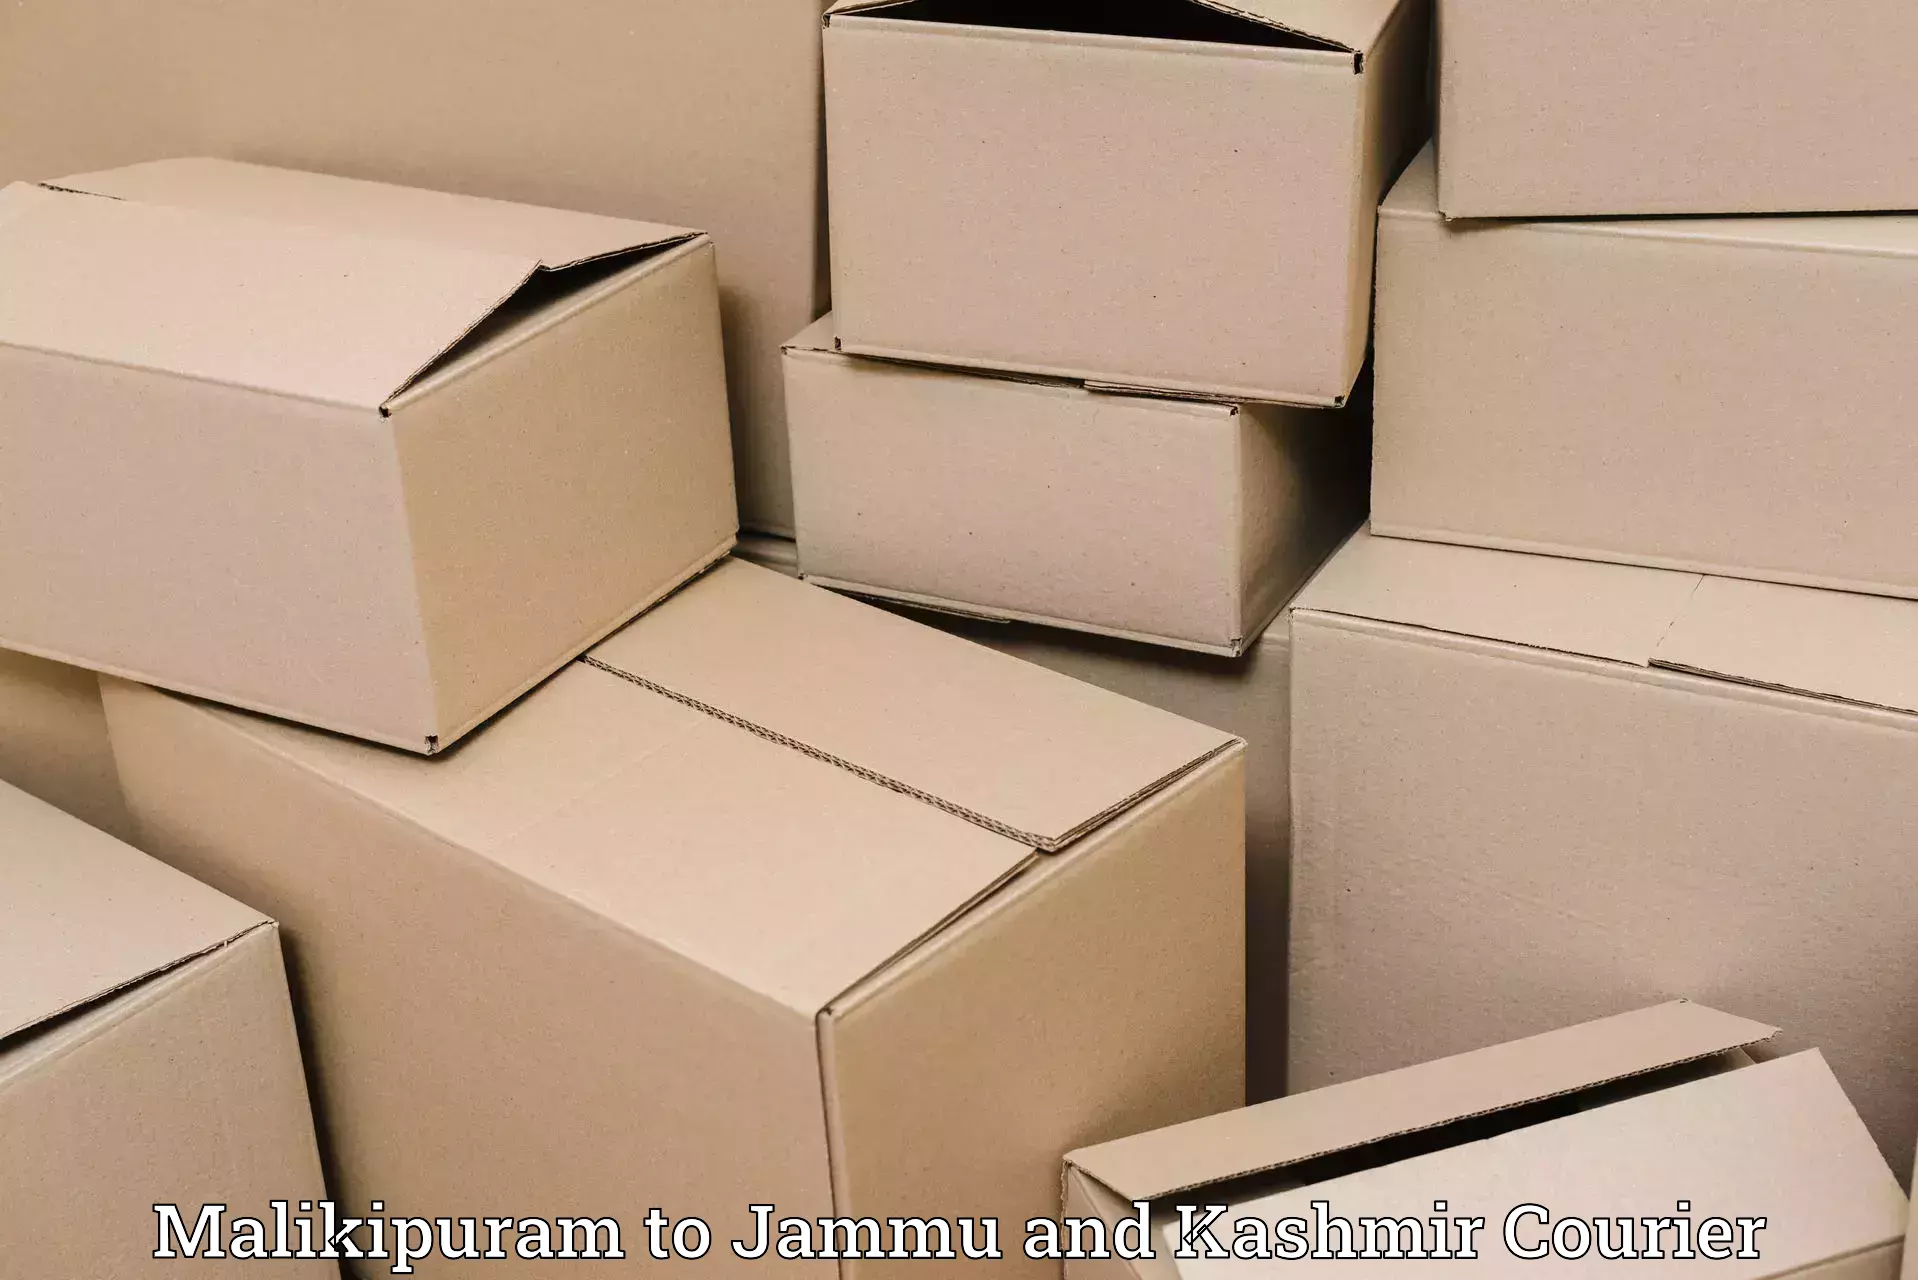 Expedited parcel delivery in Malikipuram to Jammu and Kashmir